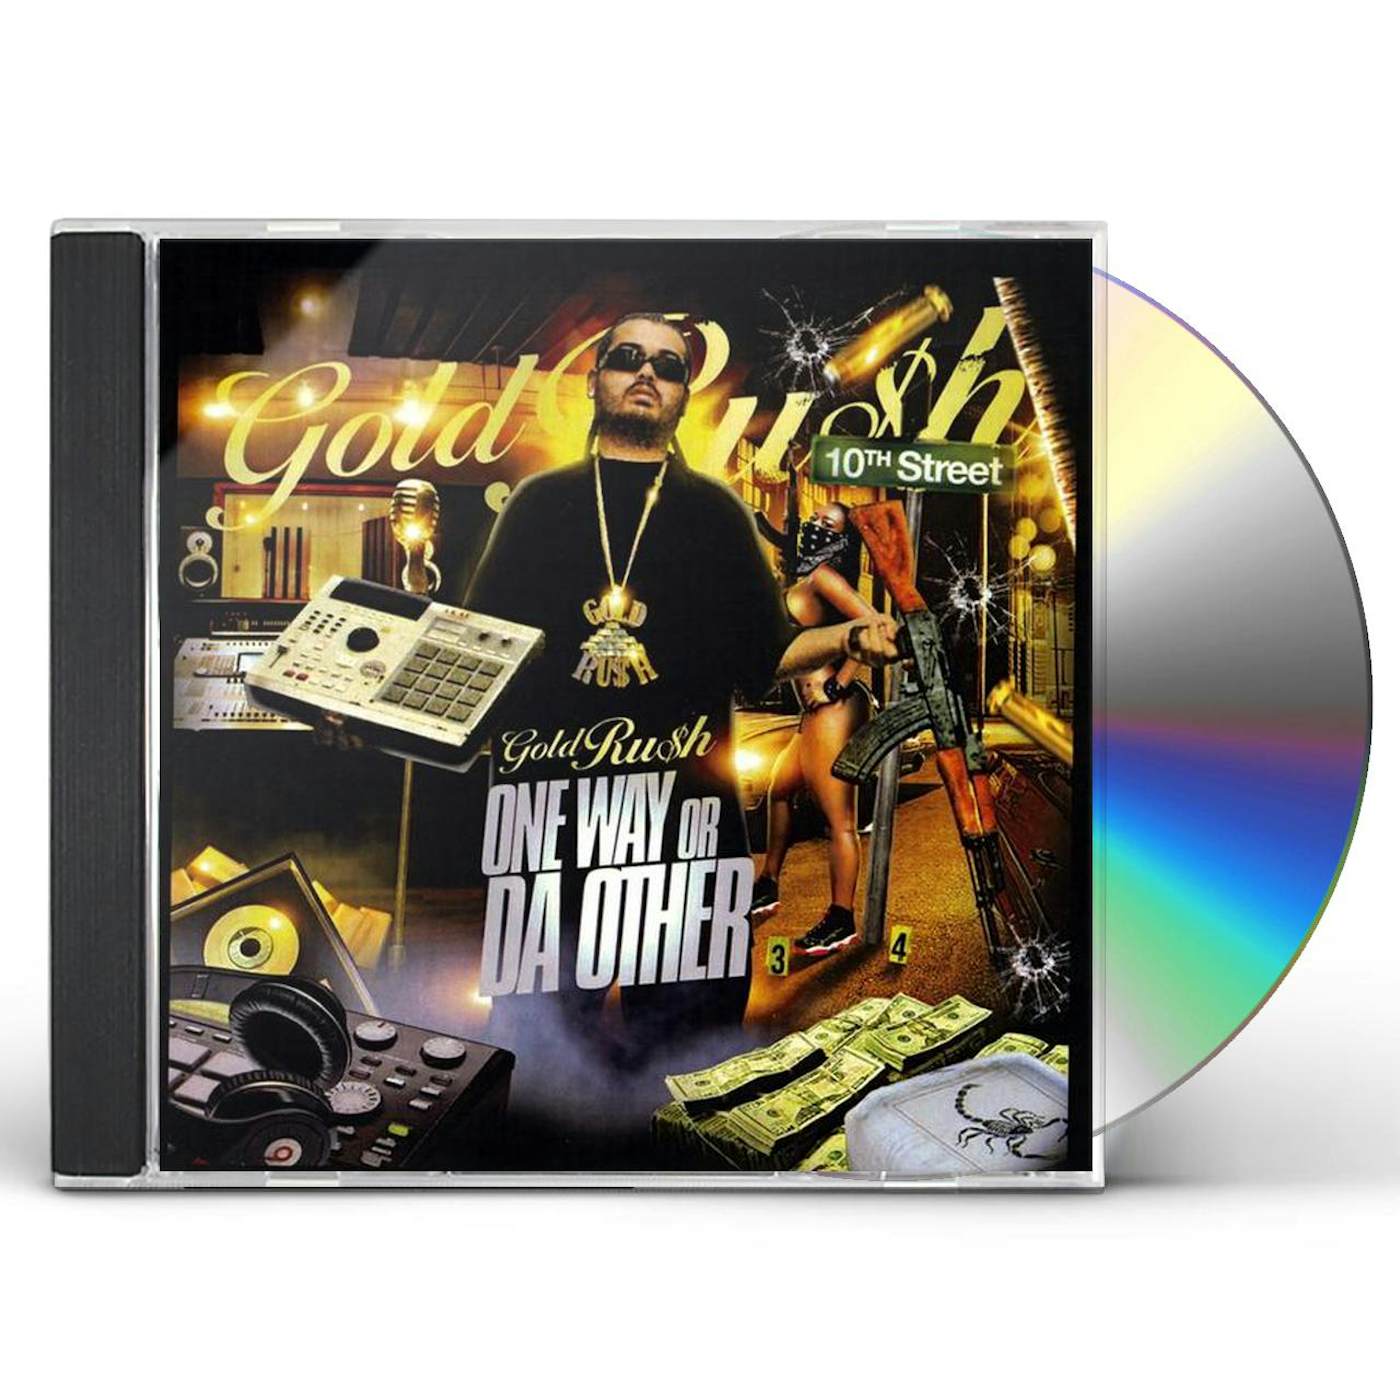 Gold Rush 1 WAY OR DA OTHER CD